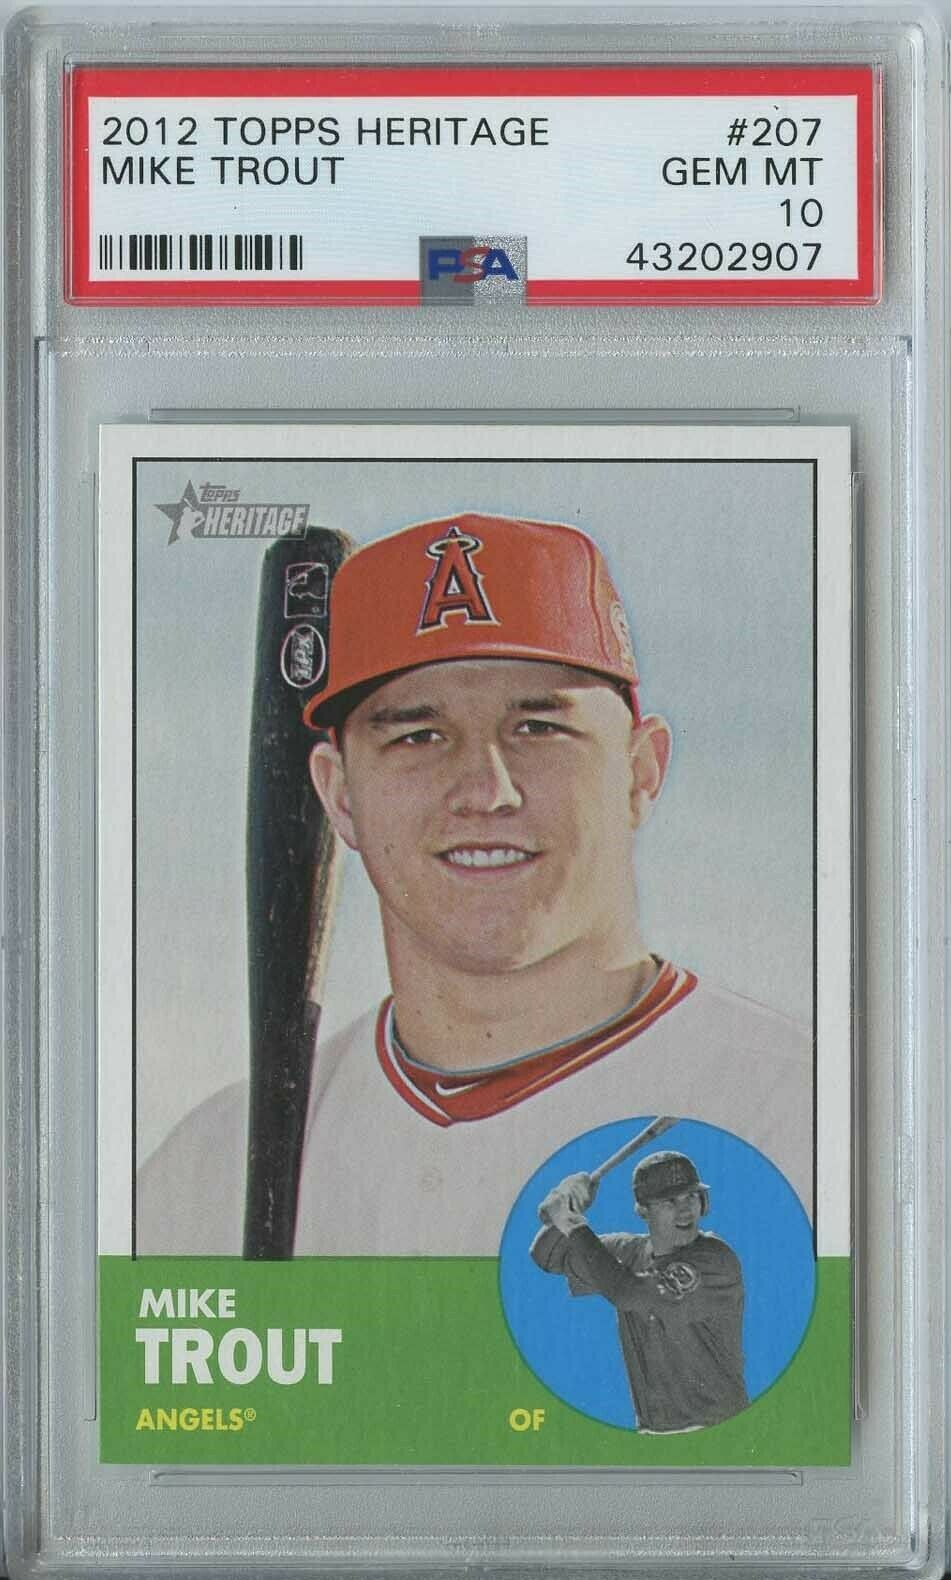 Mike Trout 2012 Topps heritage baseball 207 Los Angeles Angels RC rookie PSA 10